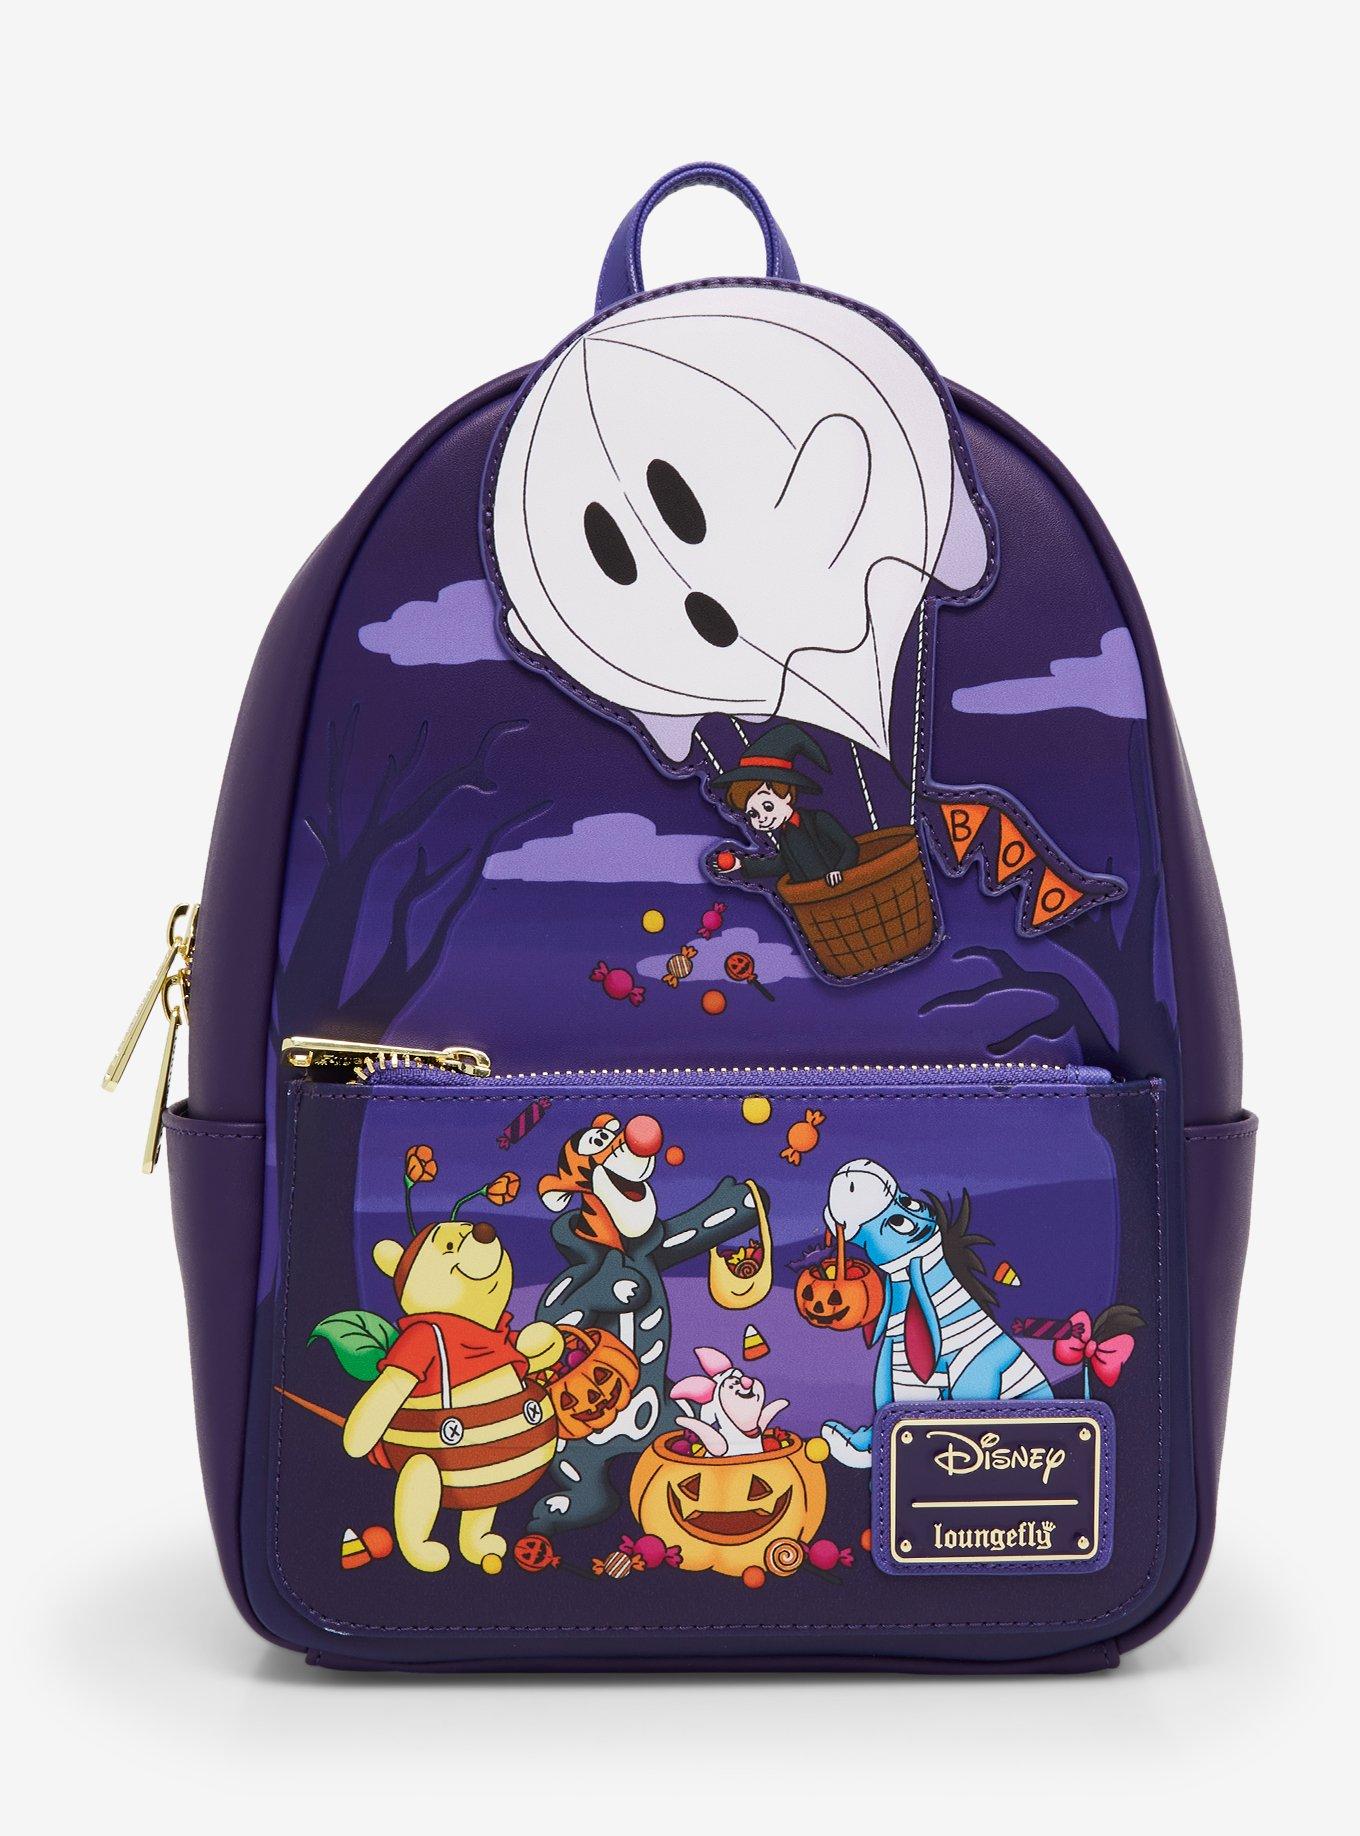 These New Disney Princess Loungefly Backpacks Are Some of the PRETTIEST  Merch We've Seen!